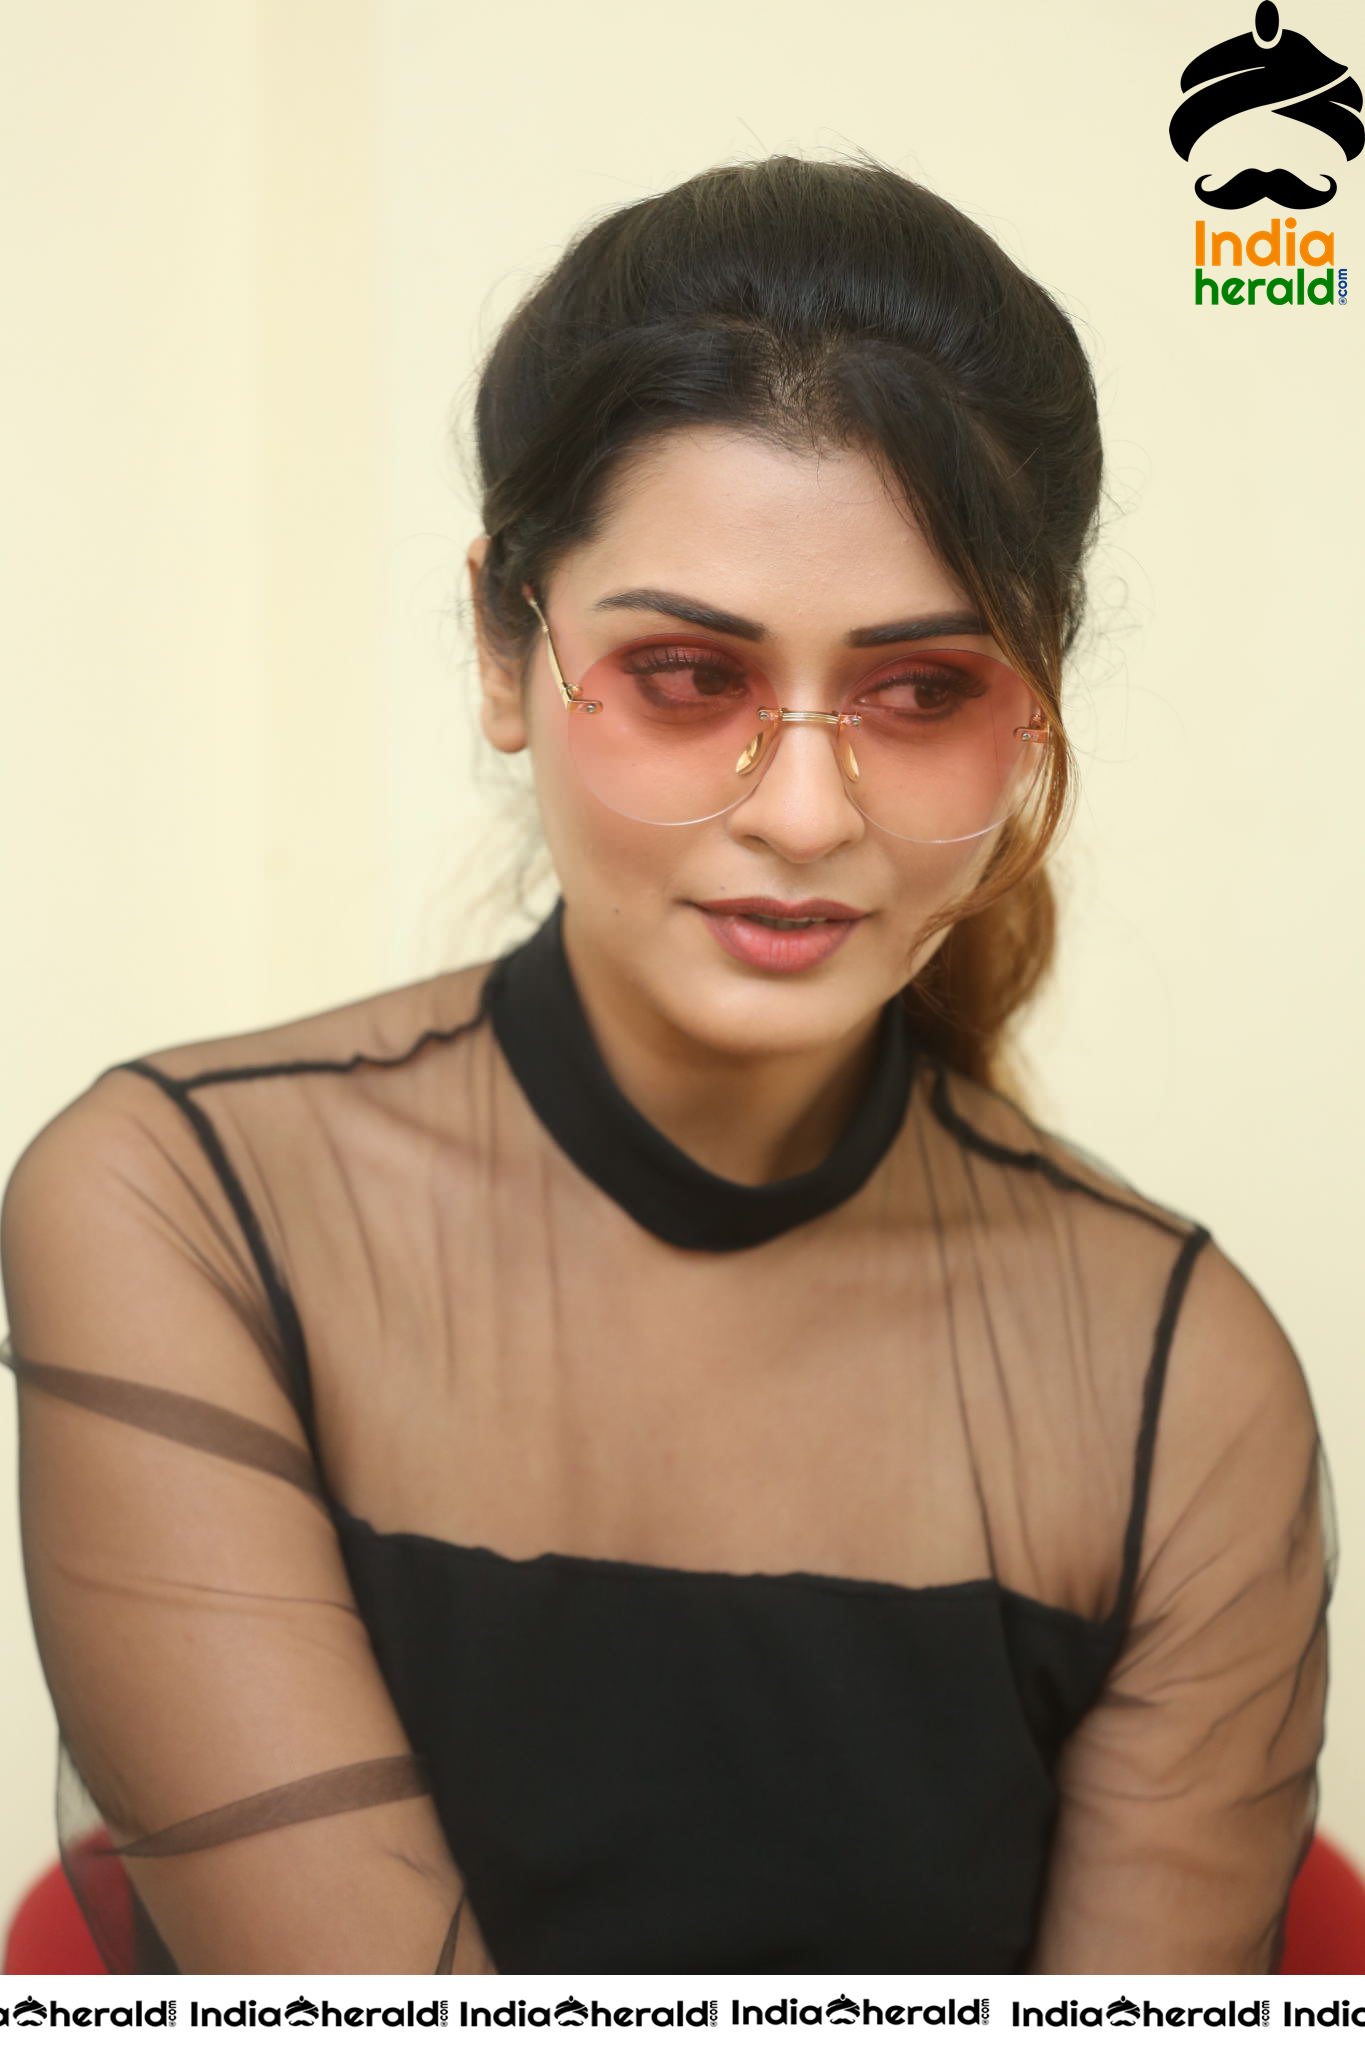 Payal Rajput Hot in Black Top during an Interview Set 2